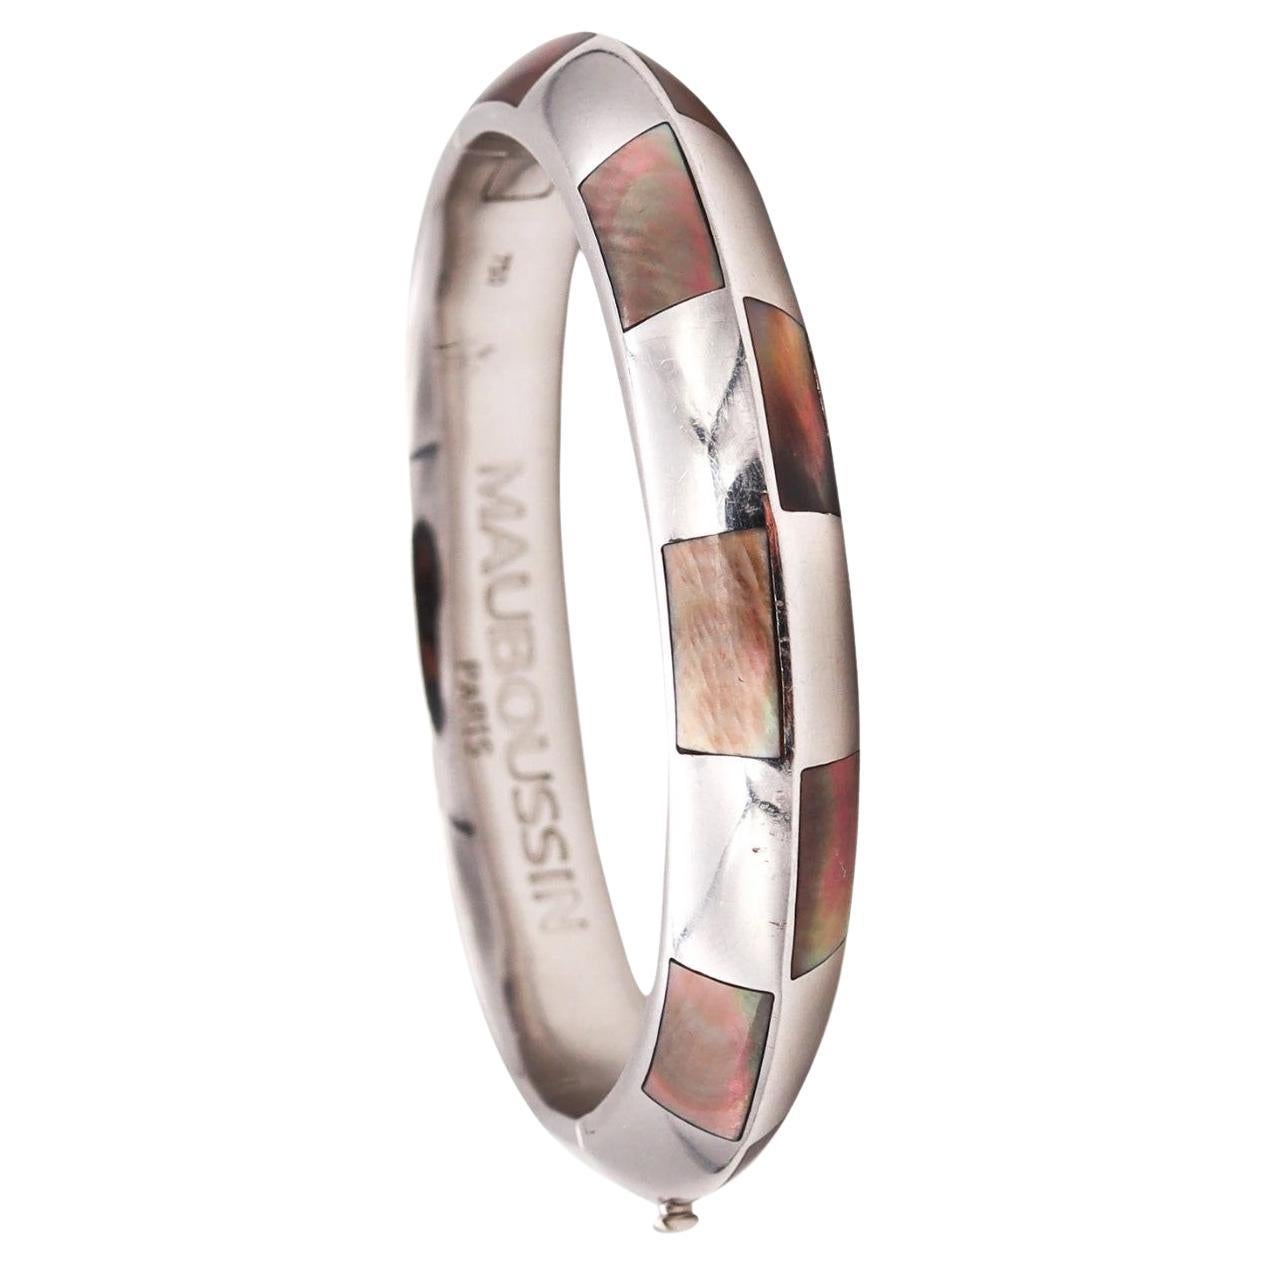 Mauboussin Paris Geometric Bangle Bracelet in 18Kt White Gold with Carved Nacre